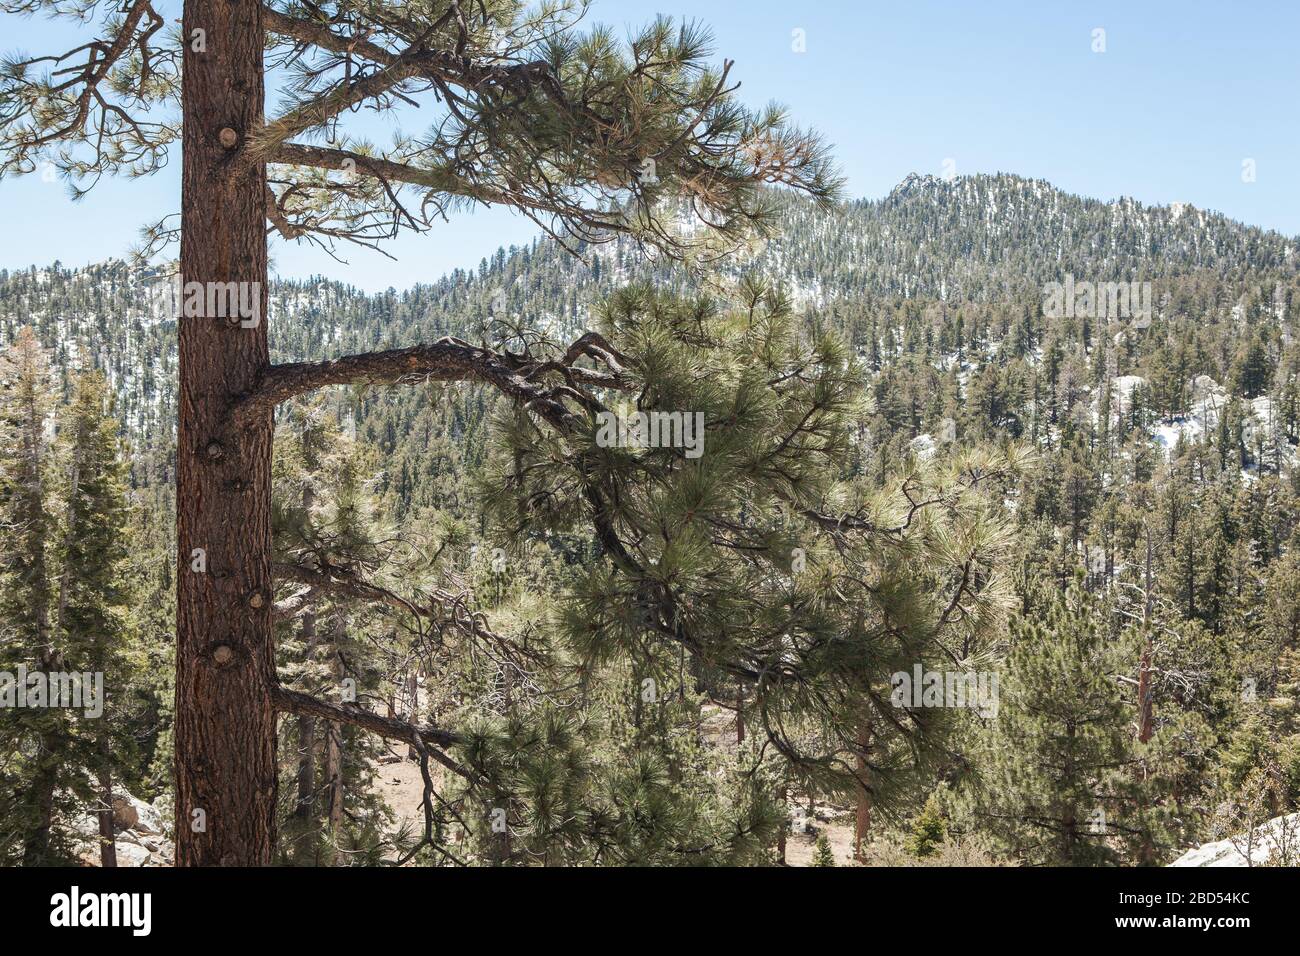 Pine trees at San Jacinto Mountain accessed by Palm Springs Aerial tramway, California, United States of America Stock Photo